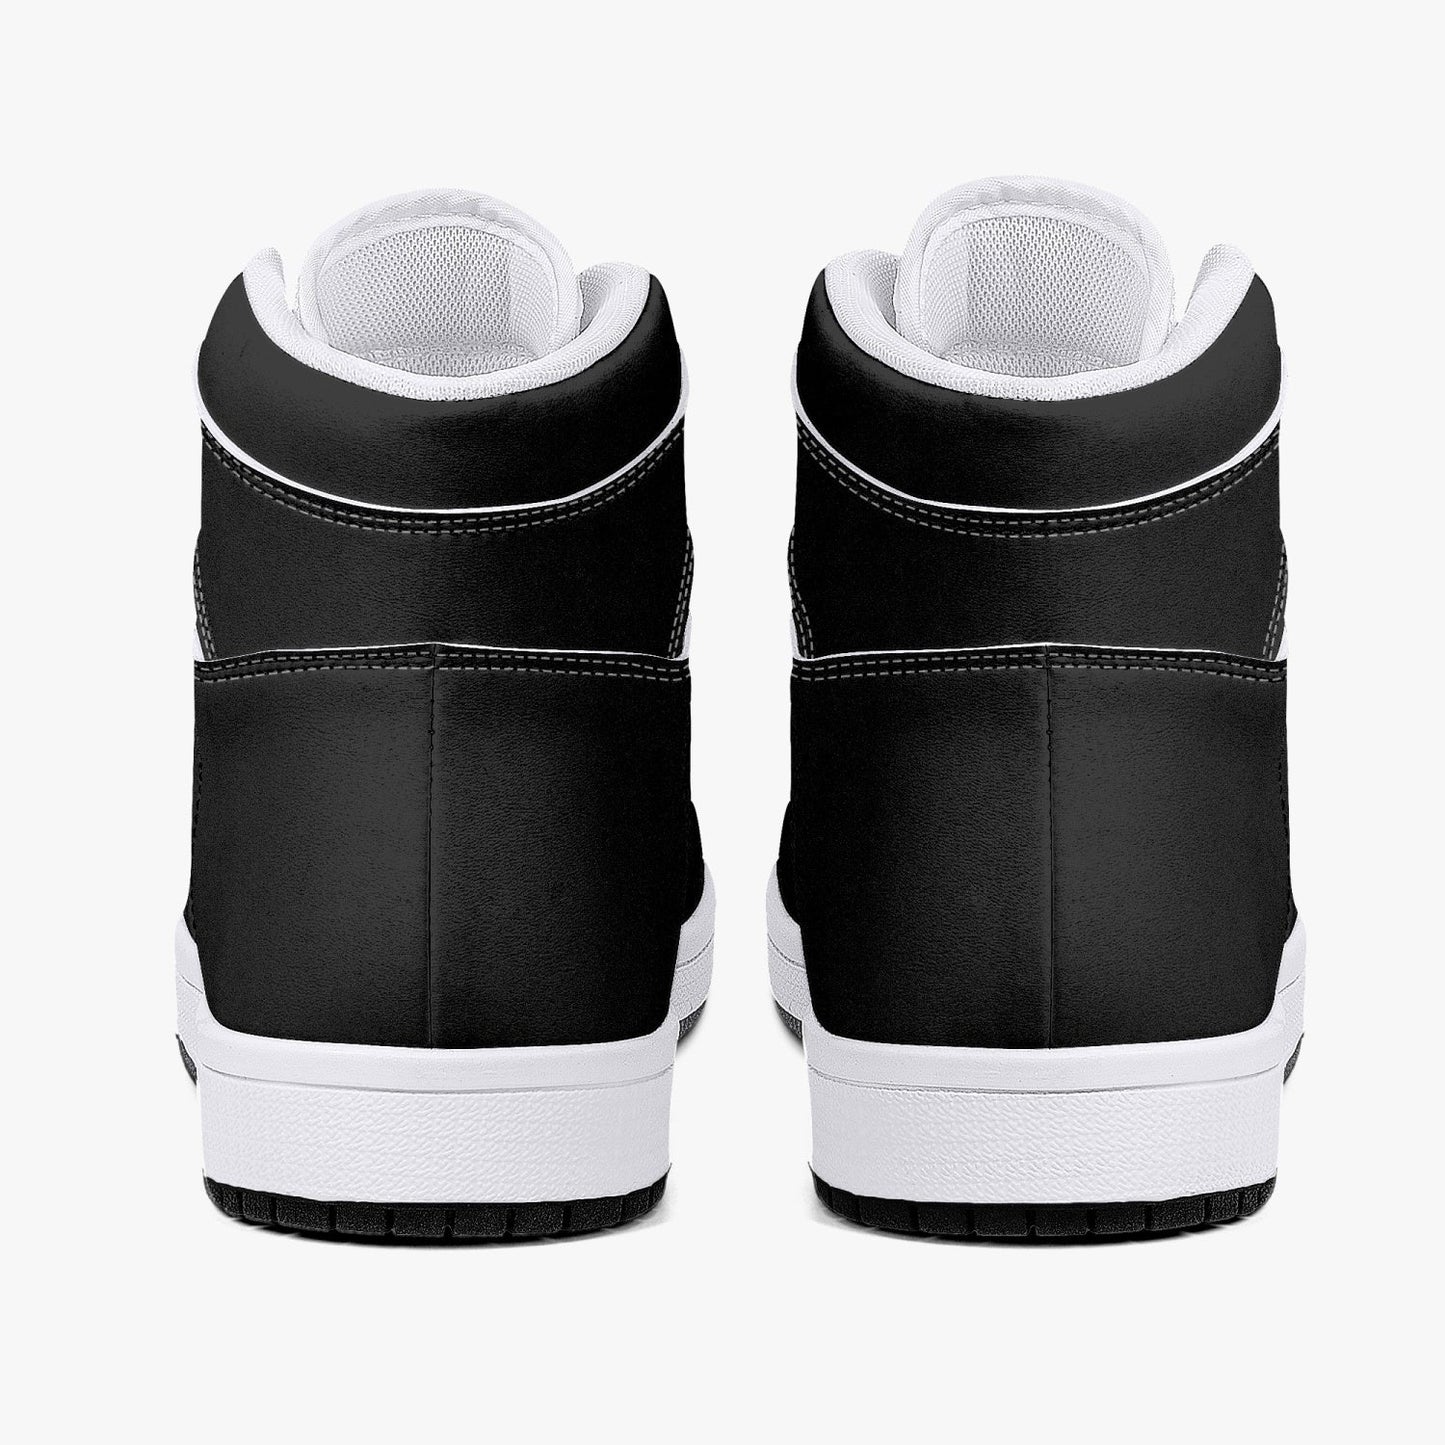 MICHAEL CLEMENTE 15 Ultimate High-Top Leather Sneakers - carbon white